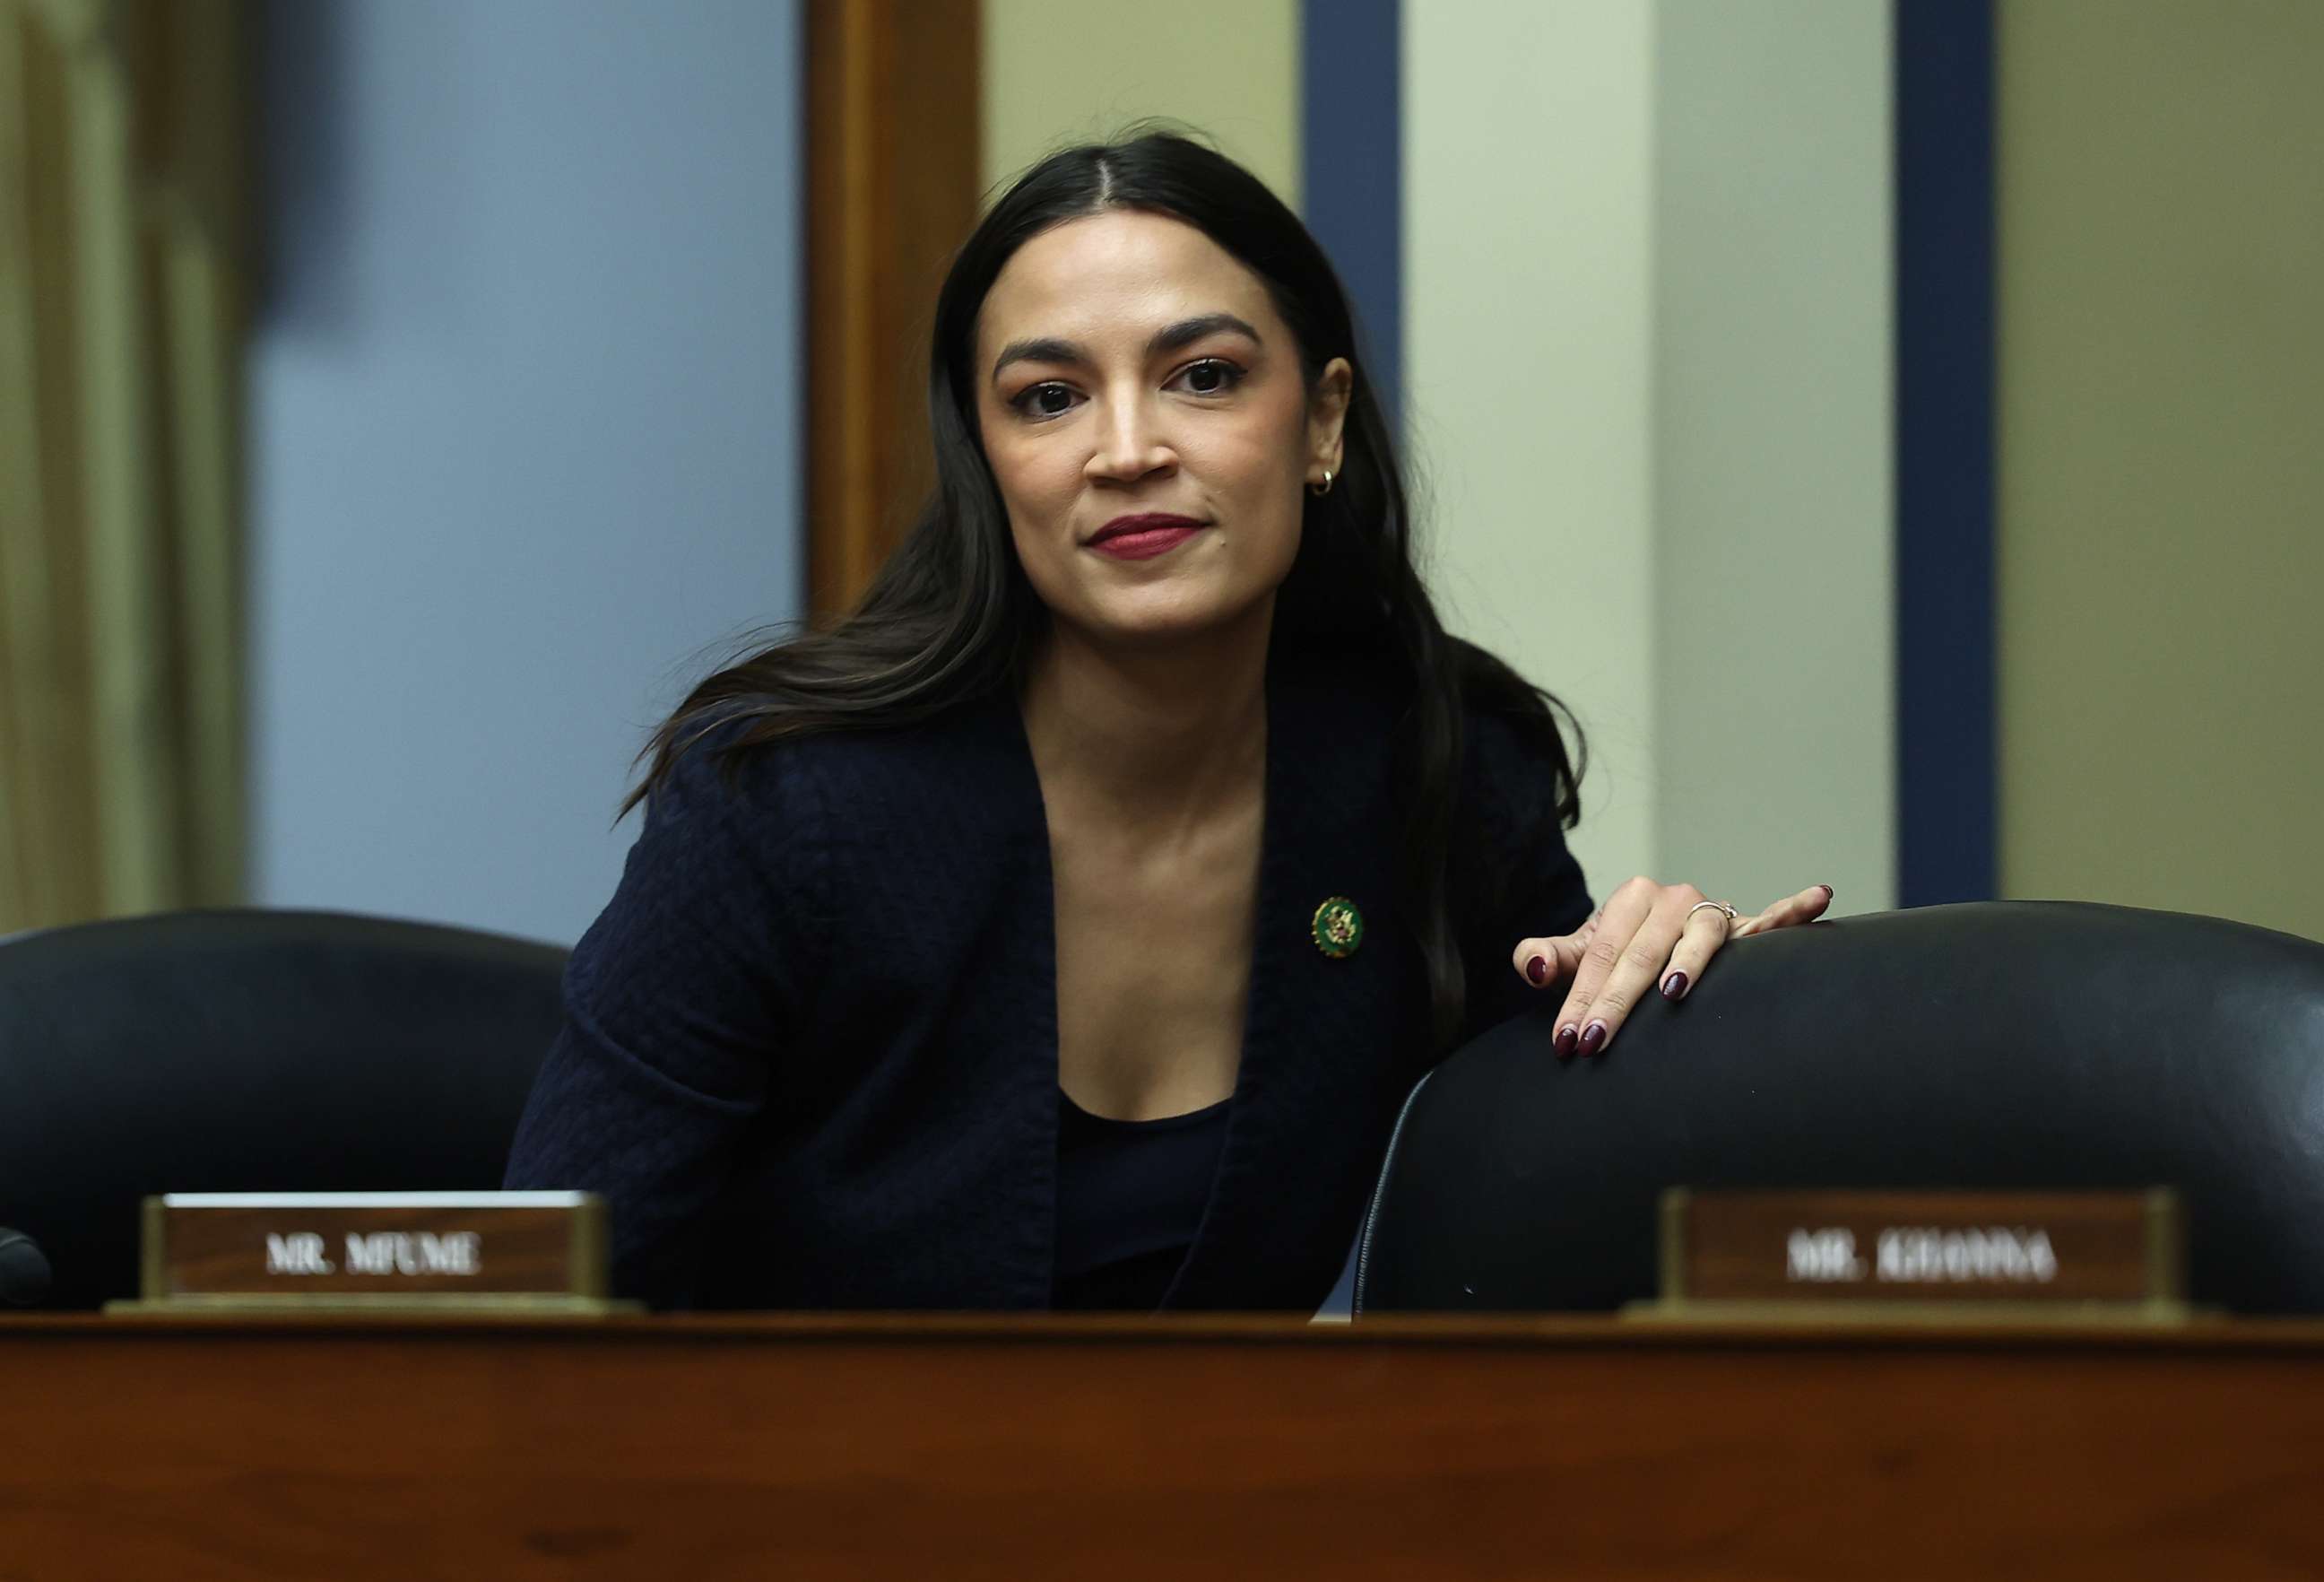 PHOTO: Alexandria Ocasio-Cortez arrives for a meeting of the House Oversight and Reform Committee in the Rayburn House Office Building, Jan. 31, 2023, in Washington.